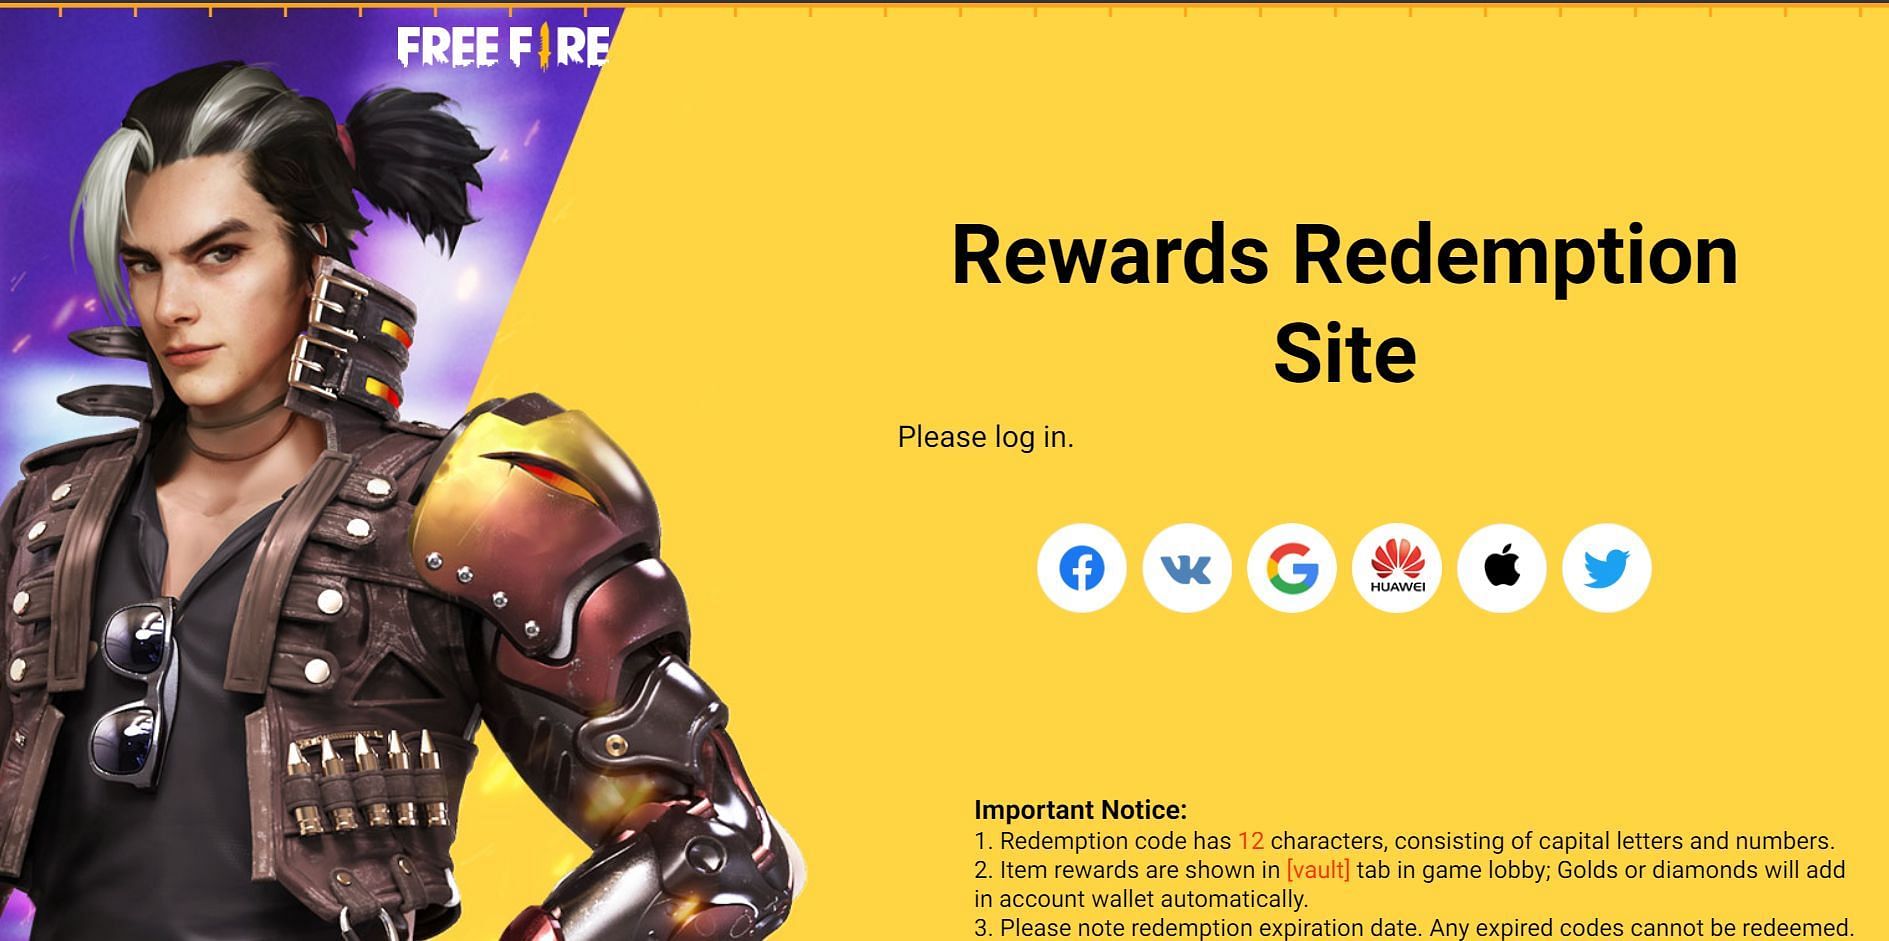 Rewards Redemption Site is where redeem codes have to be used (Image via Free Fire)